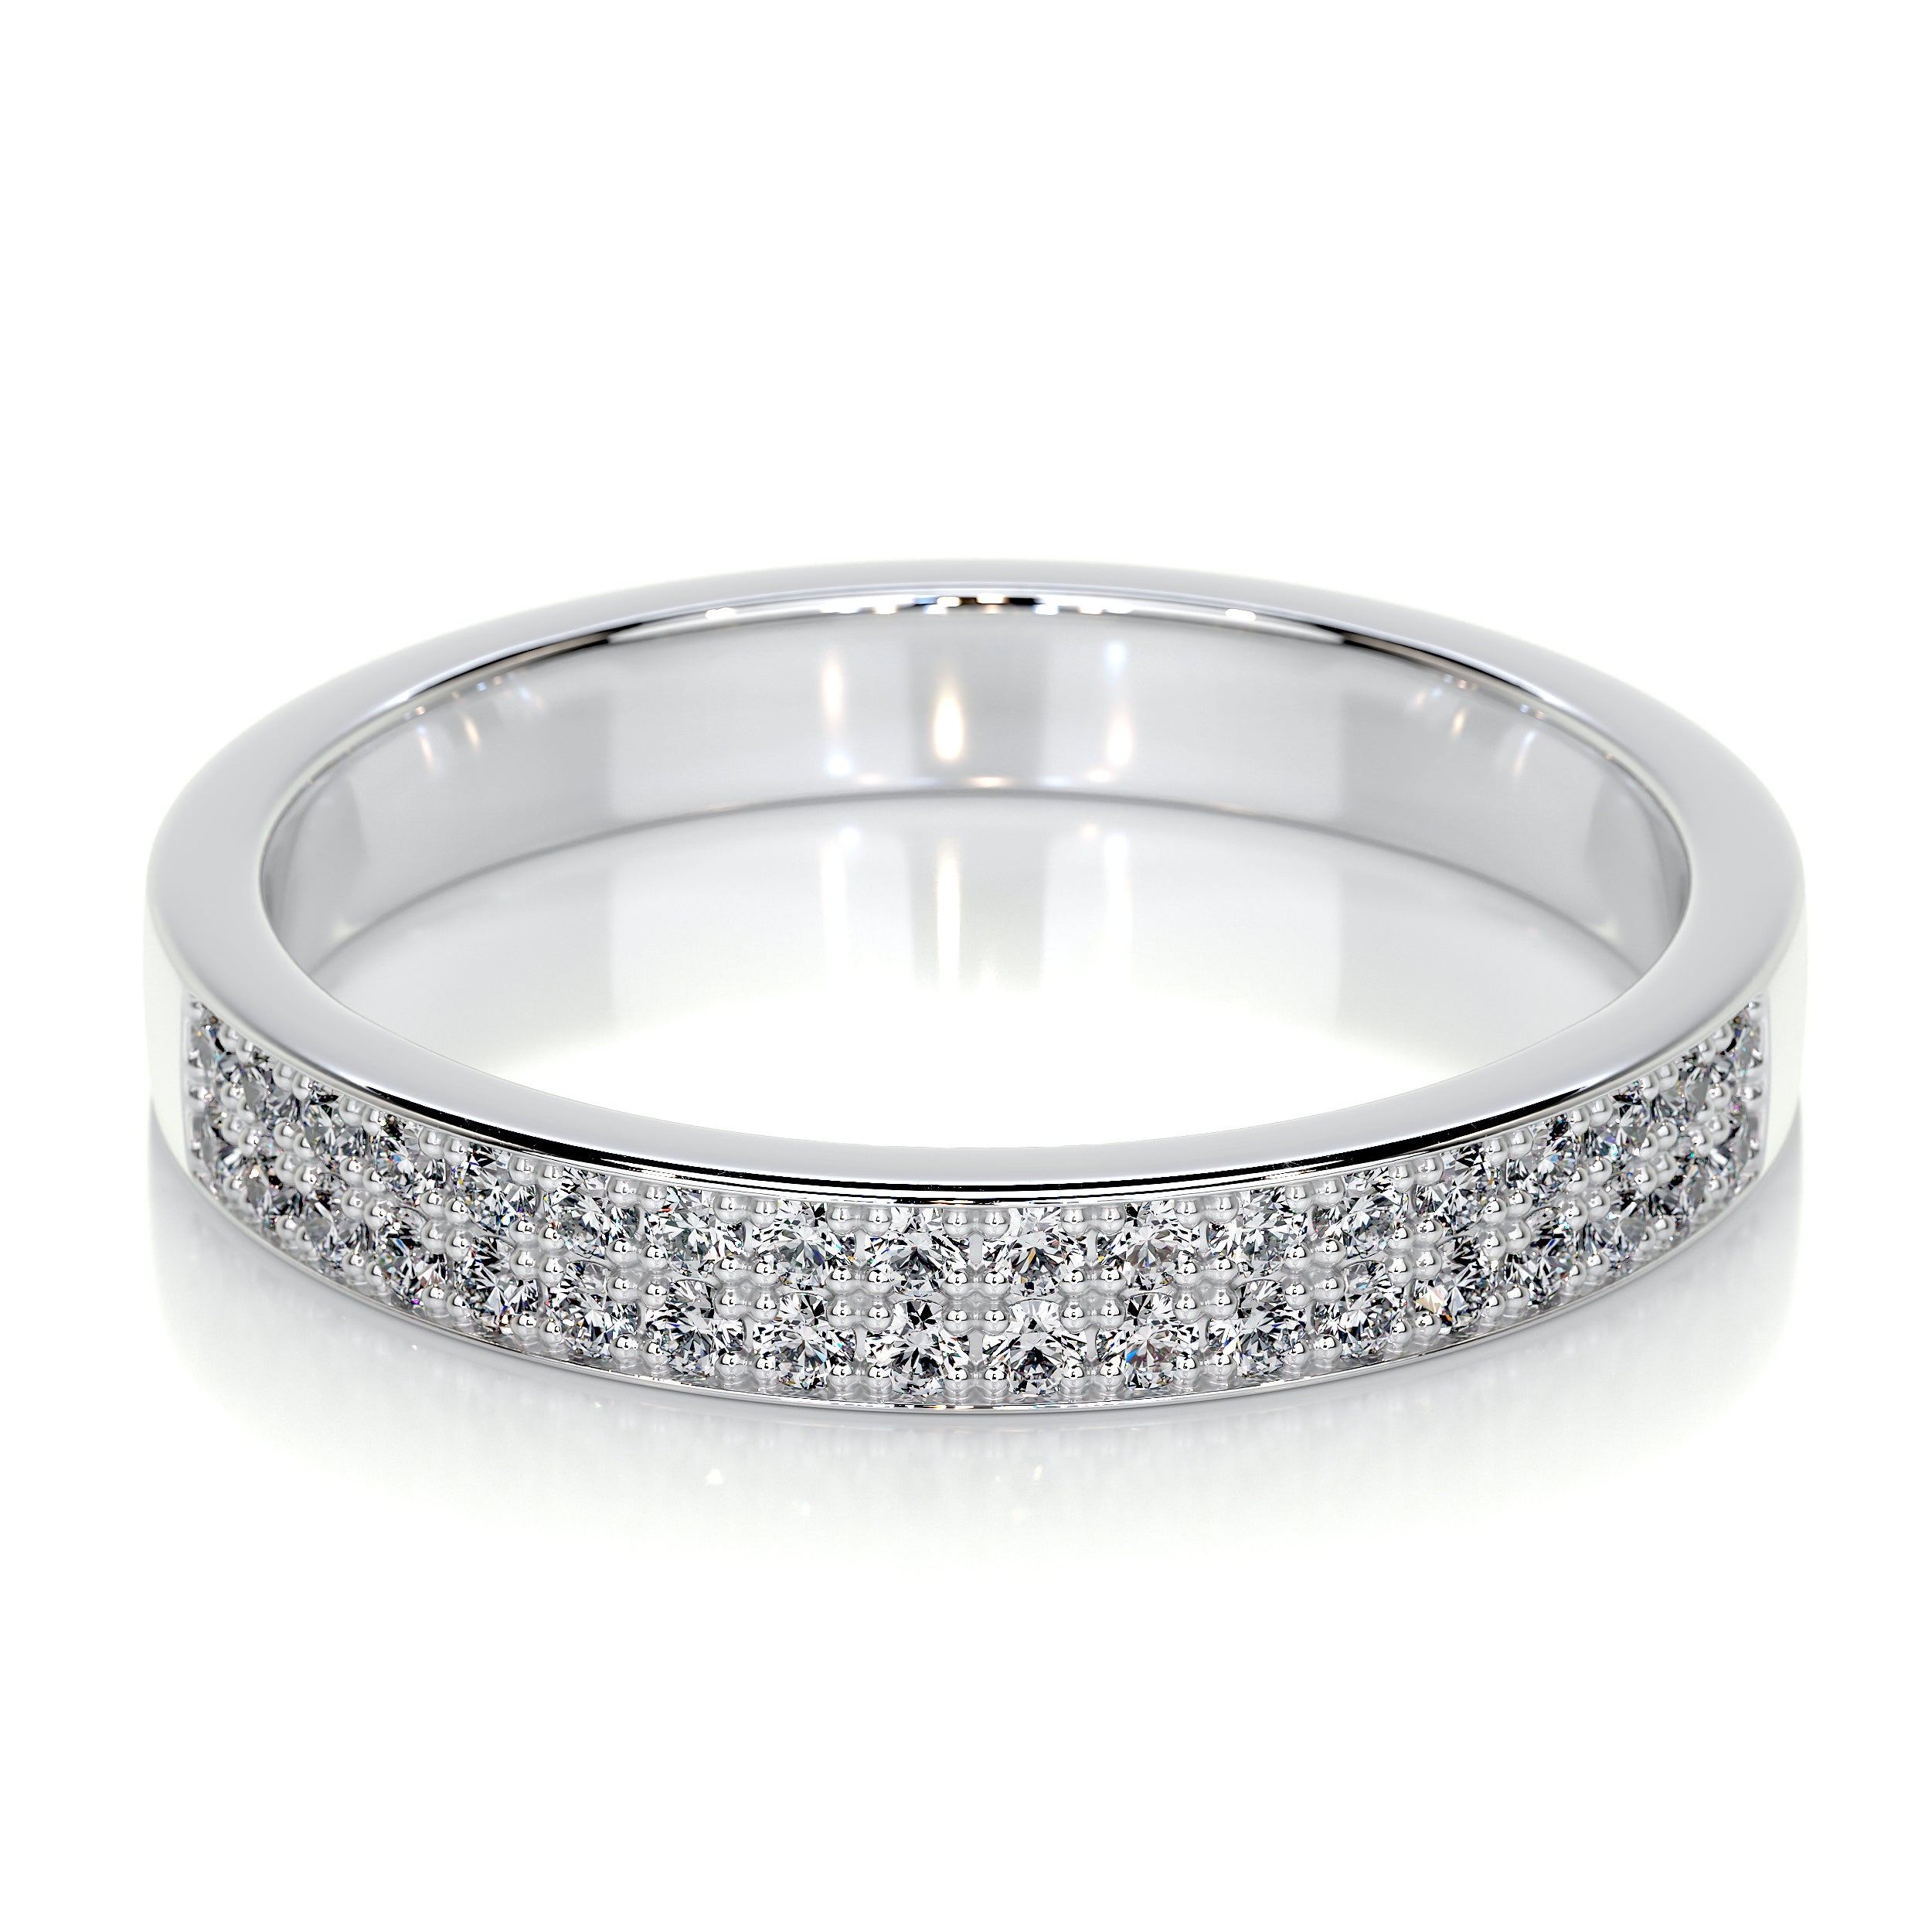 Find the Most Beautiful Women's Wedding Rings Online